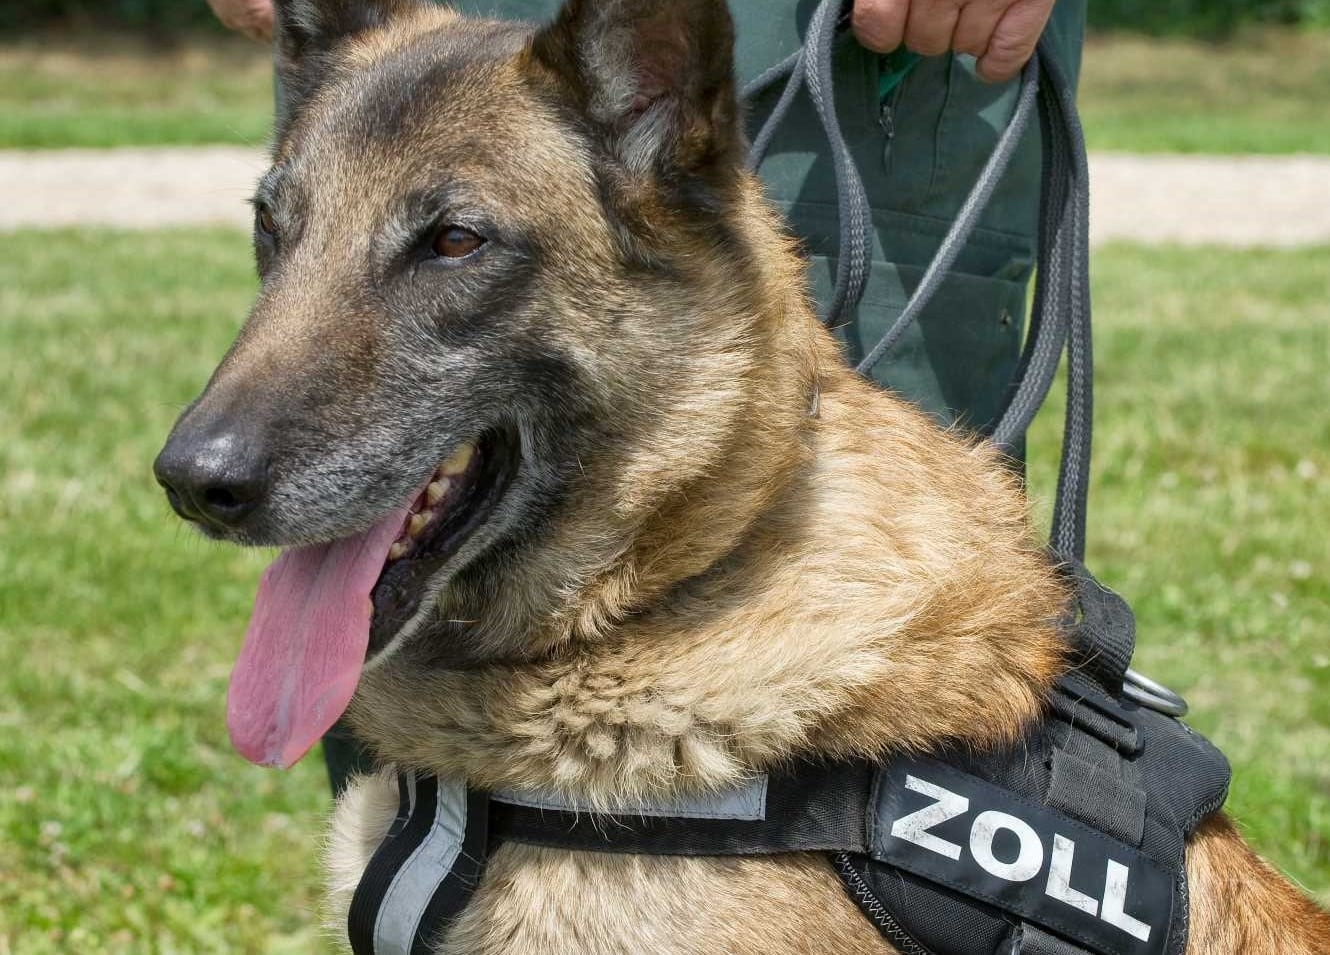 ZOLL  K-9  DHF  SpSpHF ZOLLHUNDEFÜHRER Malinois  Customs Abzeichen Patch Douanes 